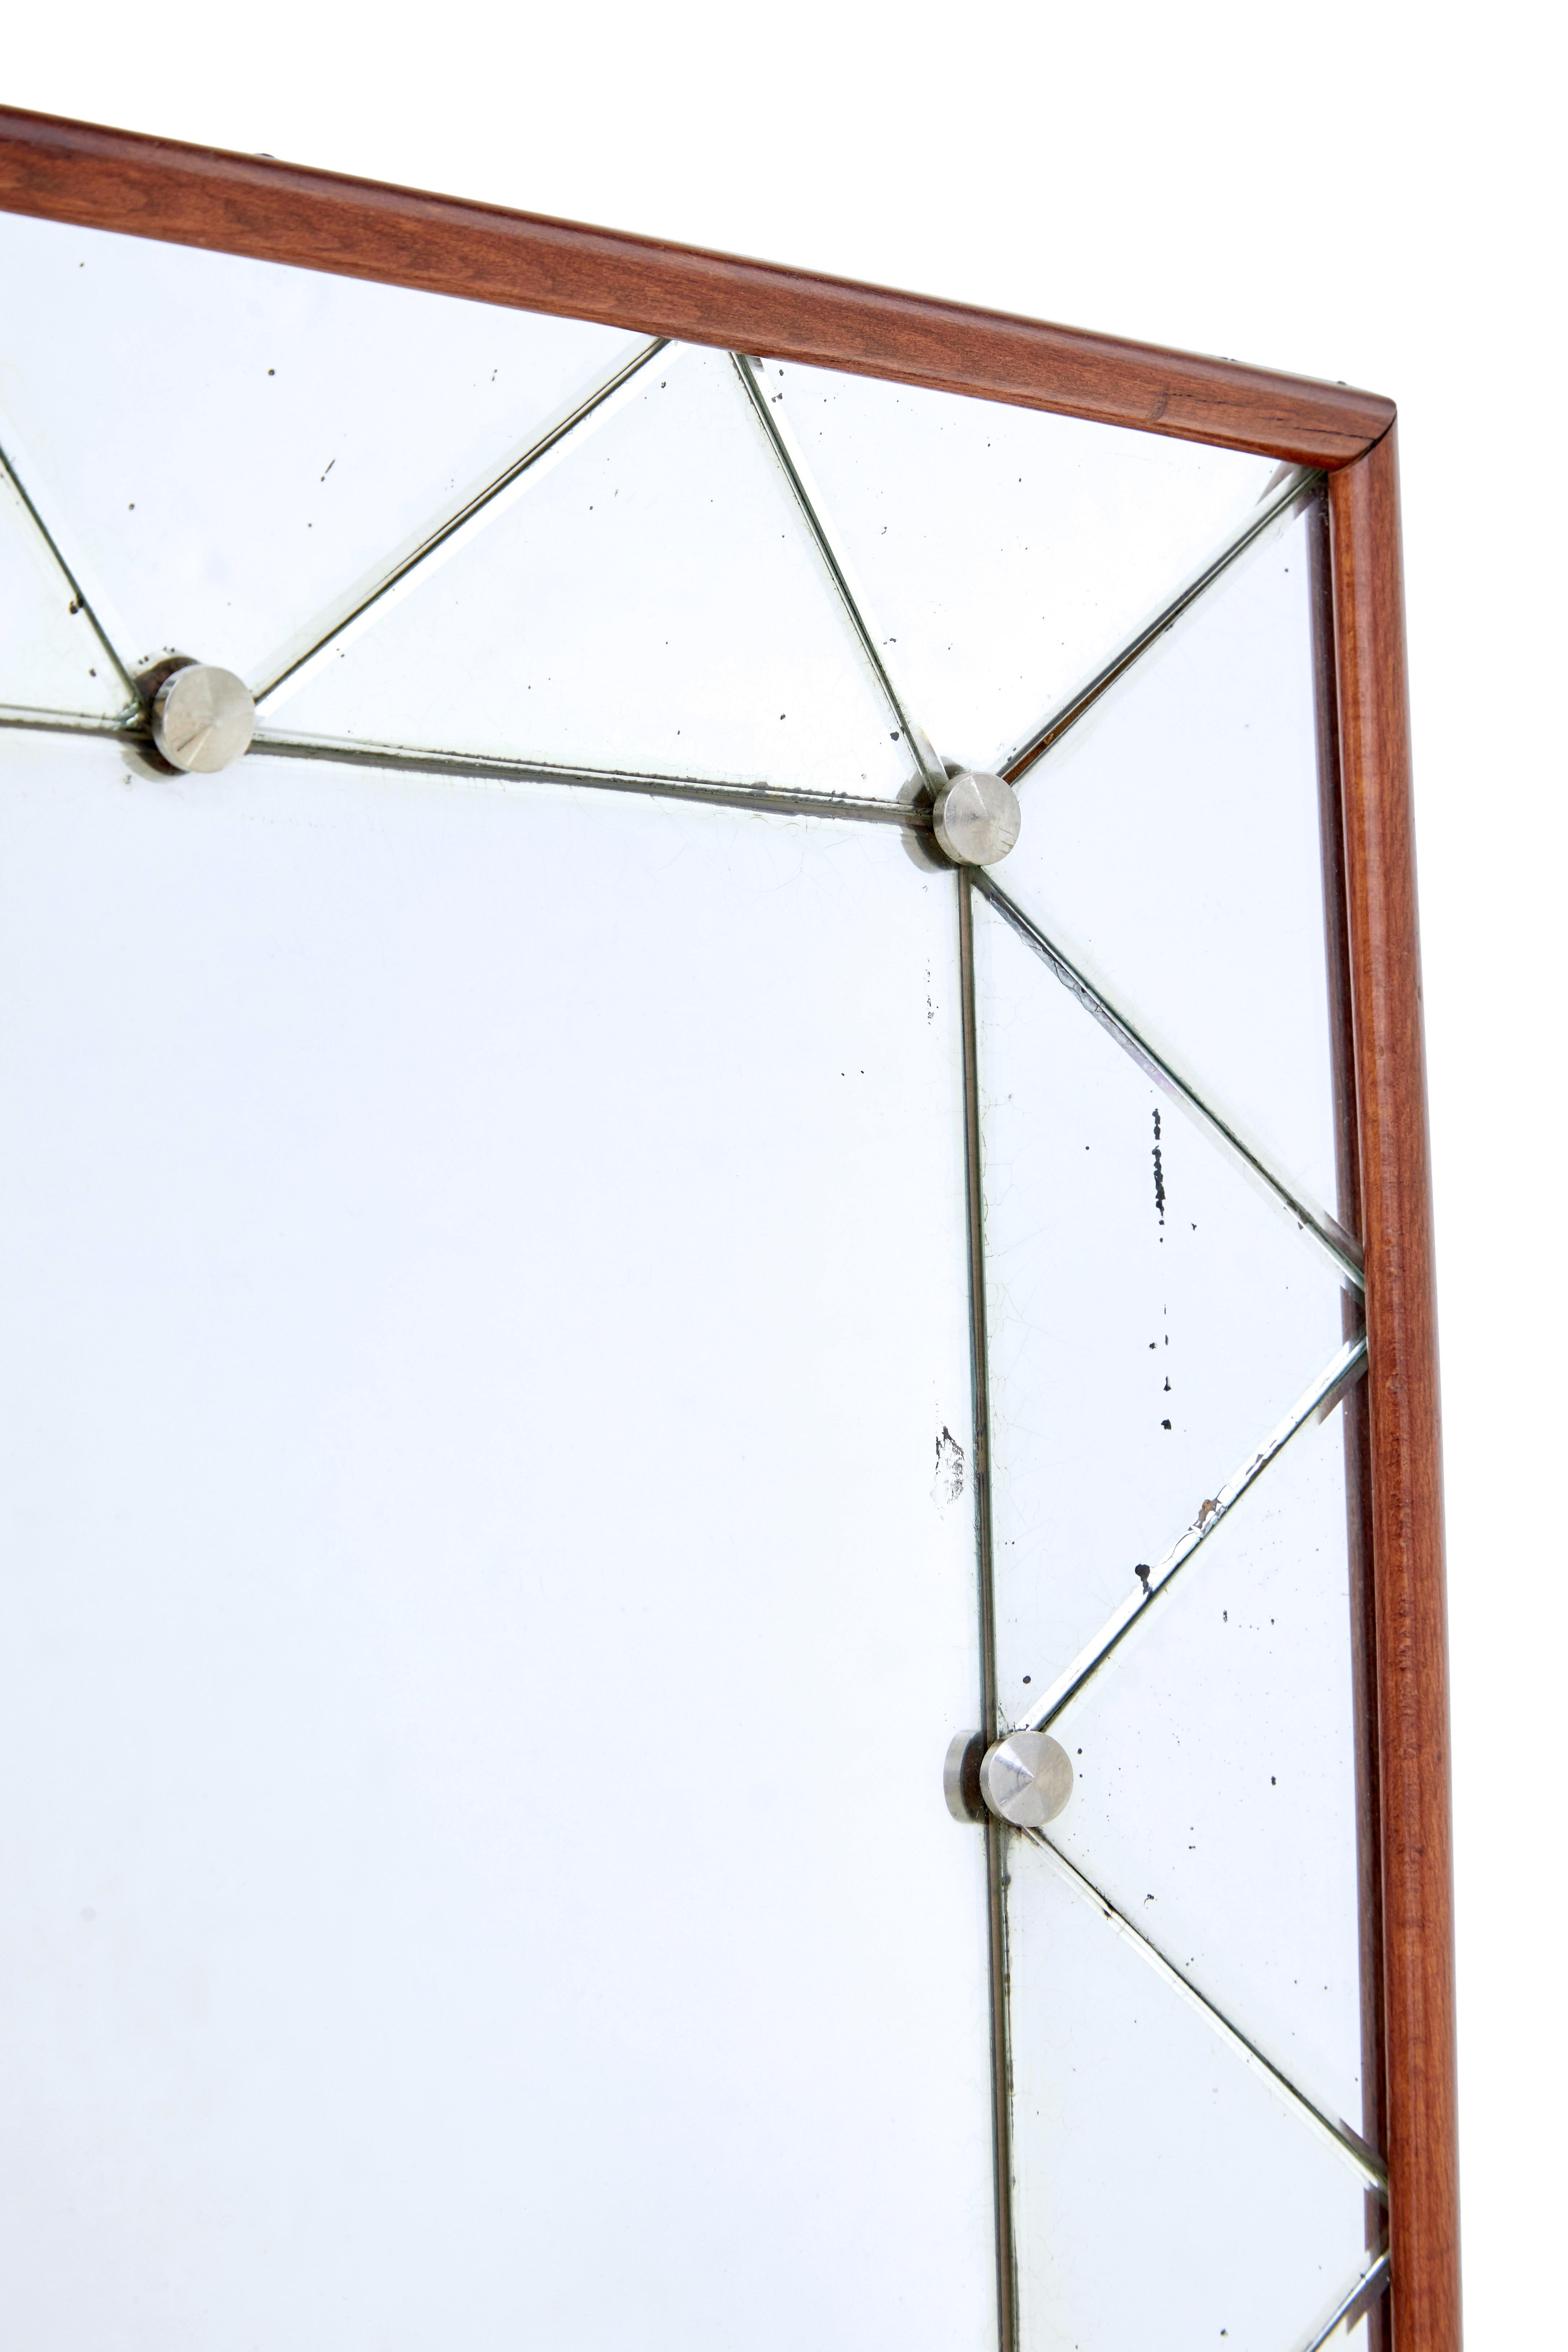 Swedish mid century shaped wall mirror circa 1960.

Inverted cushion shaped mirror ideal for most rooms around the home.

Teak frame, with a central rectangular mirror surrounded by a border of triangular cut mirror pieces, held in place by chromed